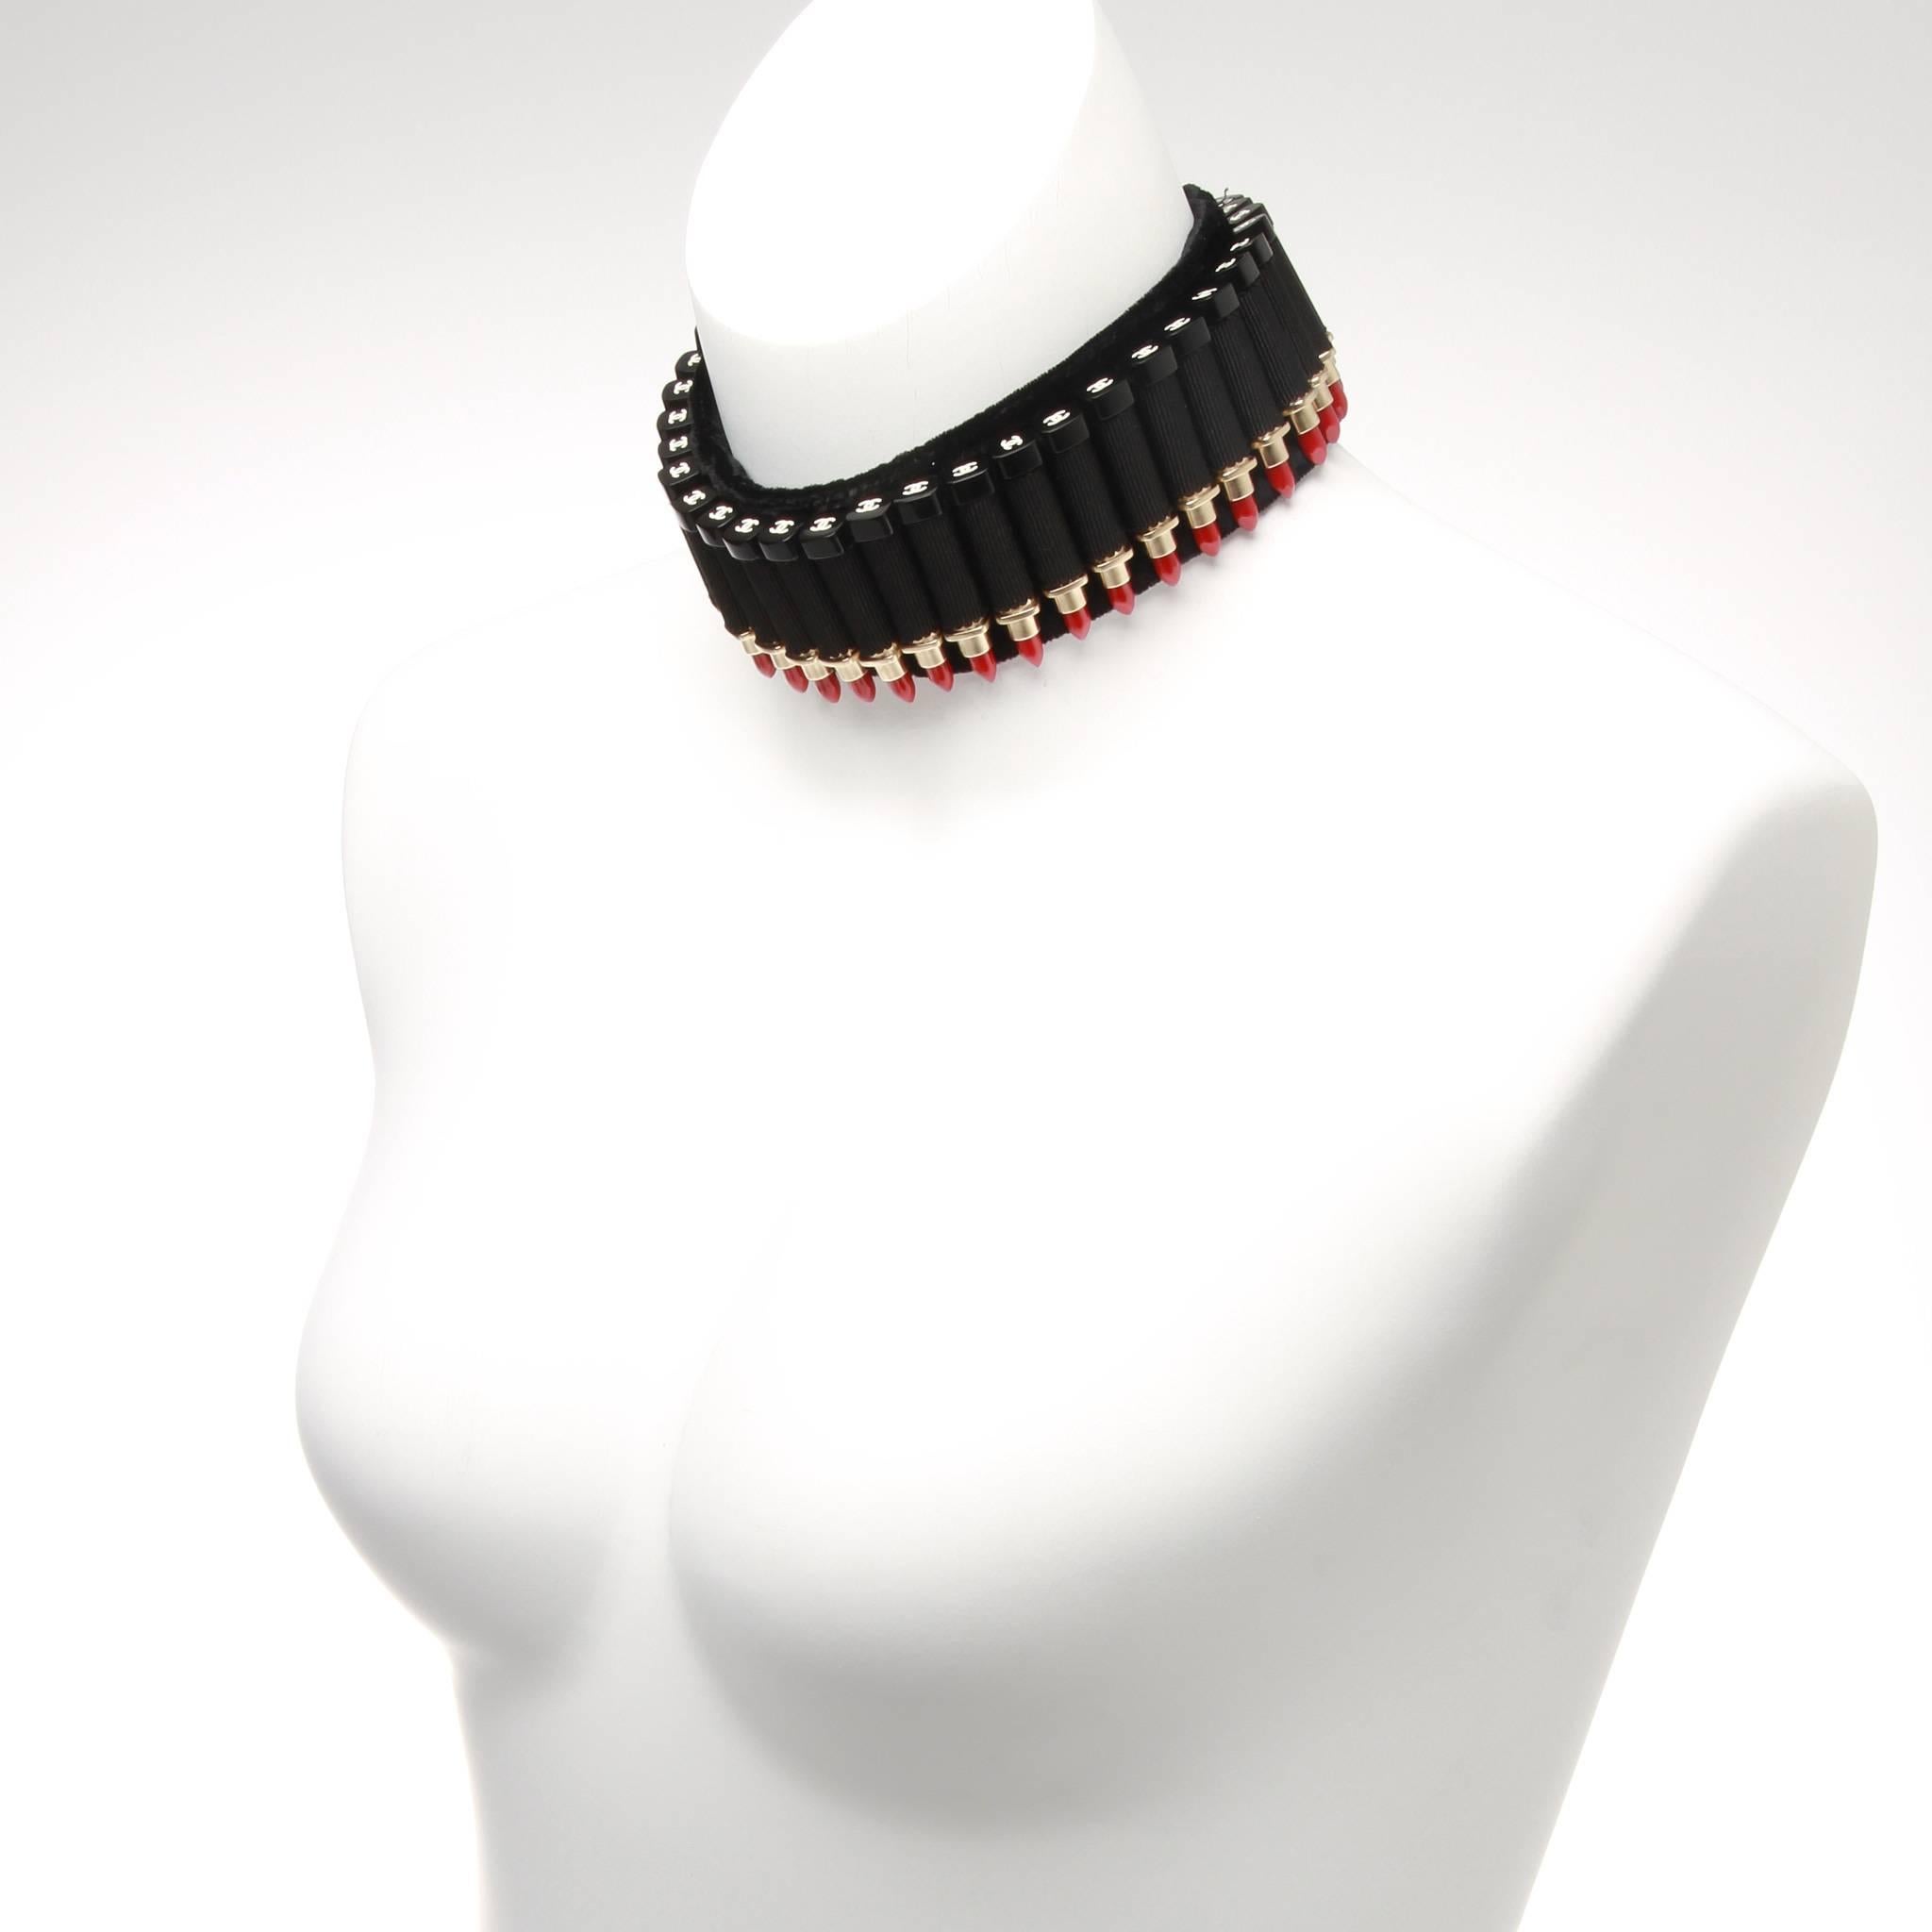 A rare Chanel choker masterfully crafted of red lipsticks strung so as to look like bullets on a rich black velvet bandolier. Iconic CC logo at the end of each lipstick. 

Fastener: Stamped silver hook at back. Comes with original and authentic box.